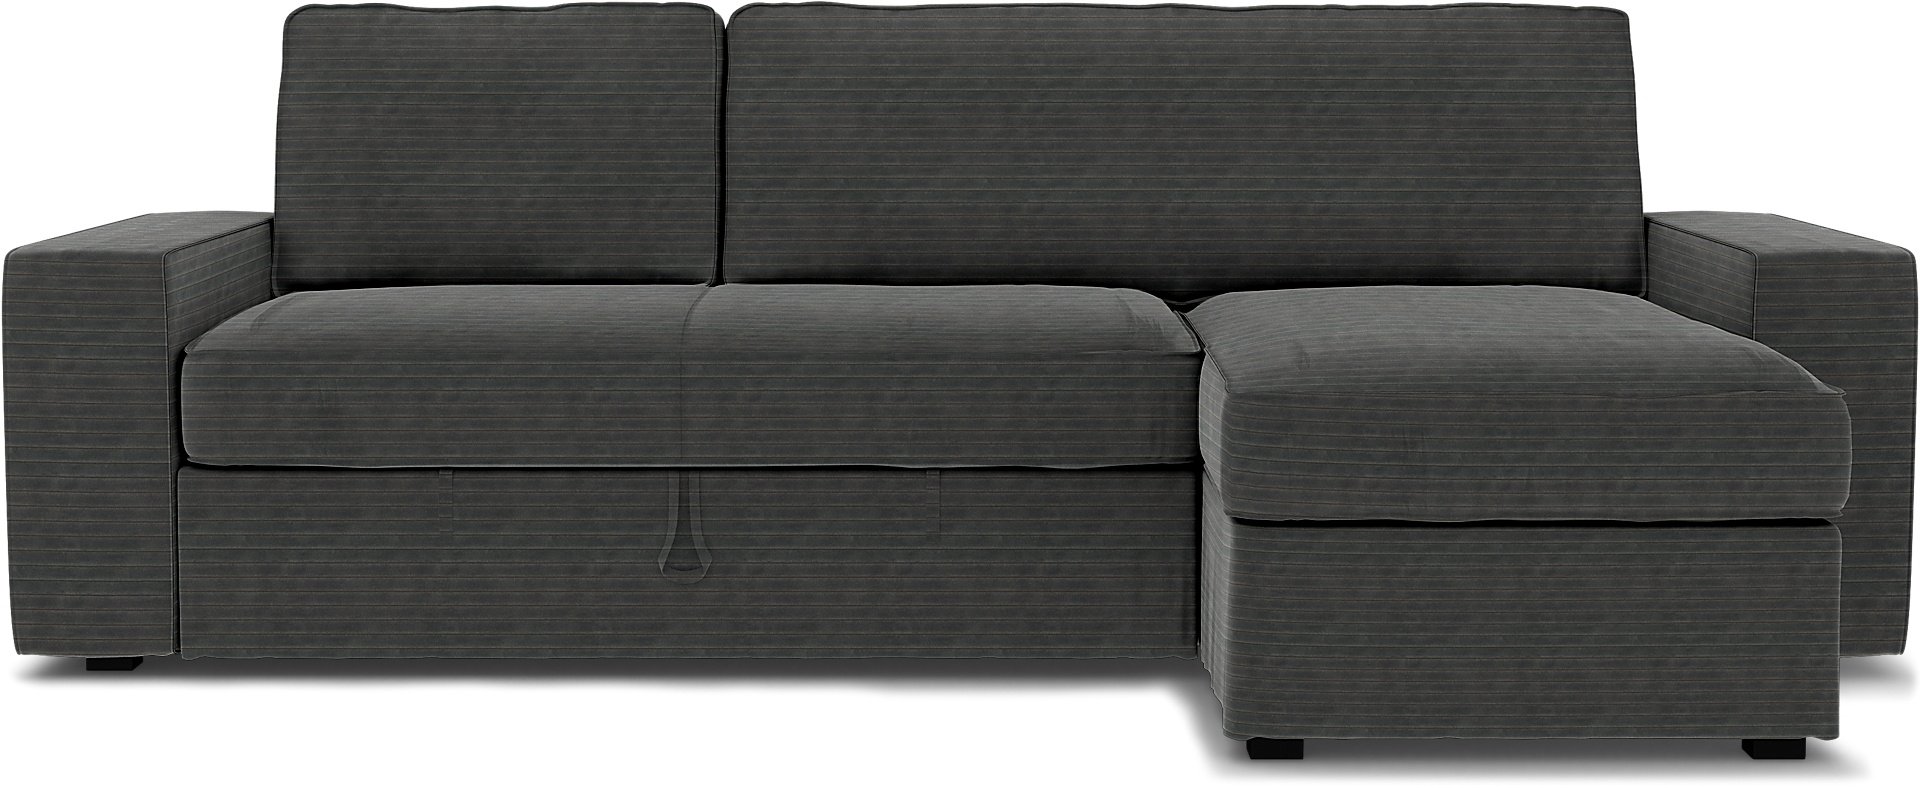 IKEA - Vilasund sofa bed with chaise cover, Licorice, Corduroy - Bemz